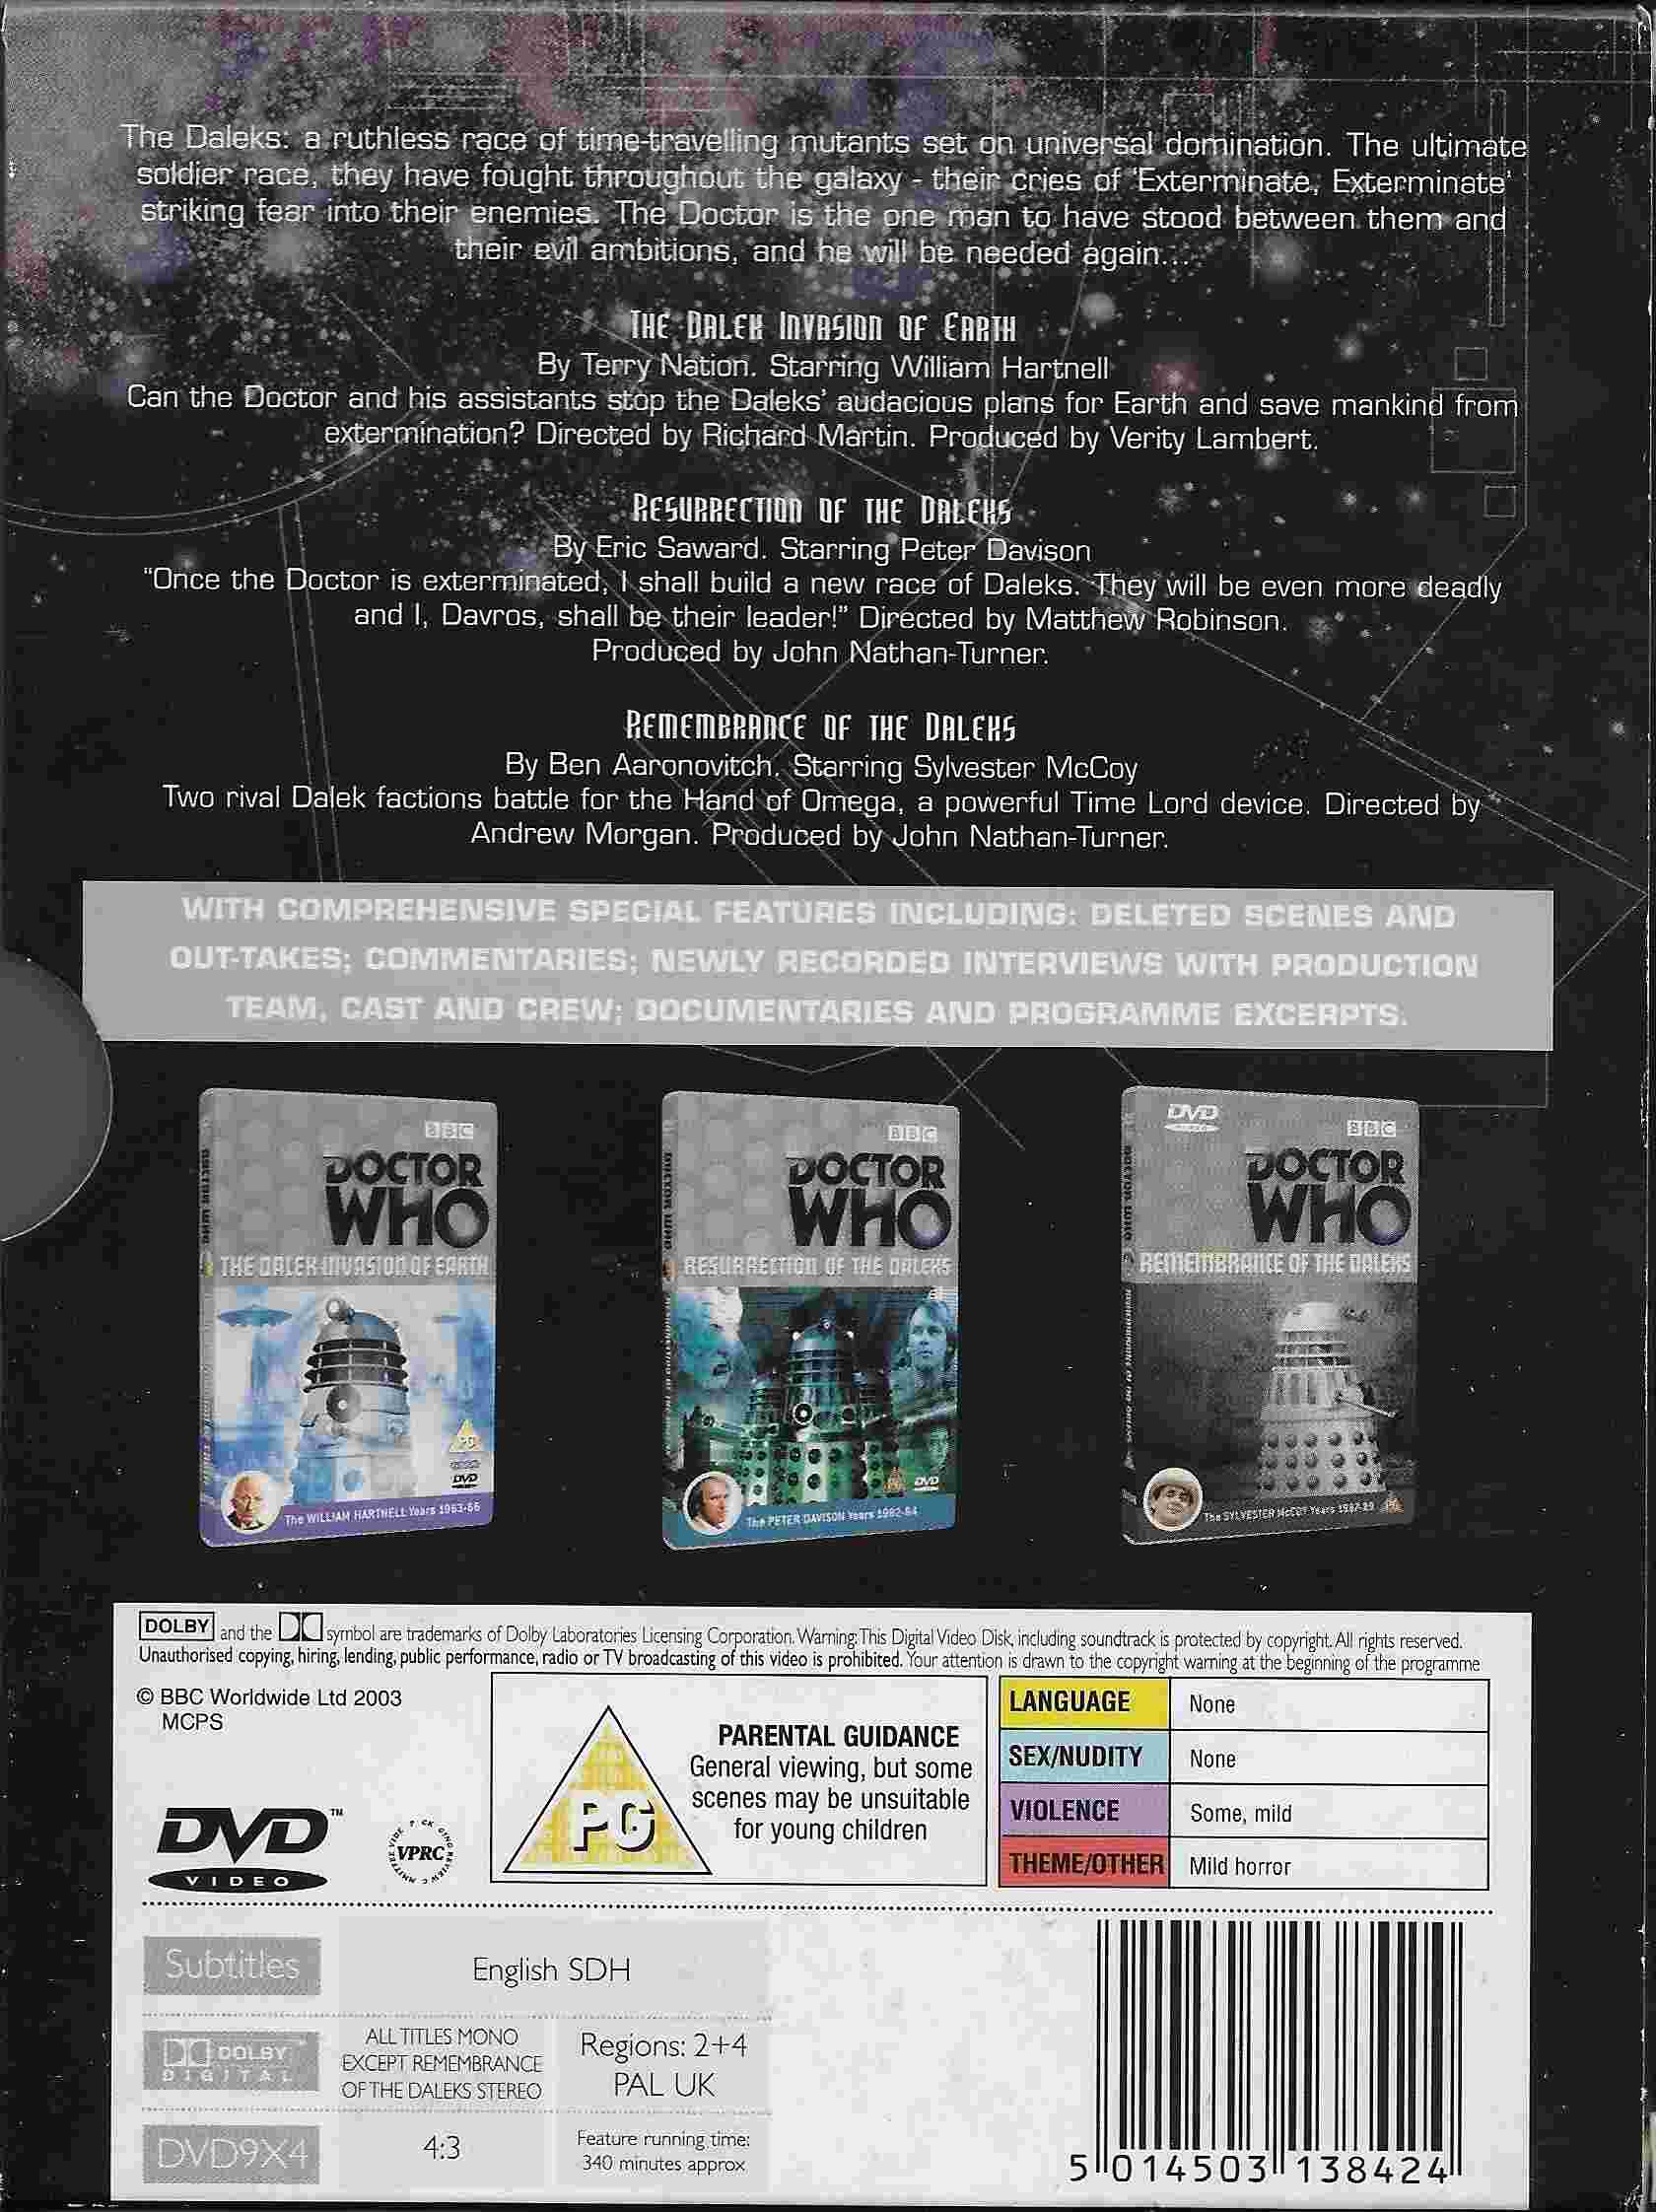 Picture of BBCDVD 1384 Doctor Who - Dalek collectors edition by artist Terry Nation / Eric Saward / Ben Aaronovitch from the BBC records and Tapes library